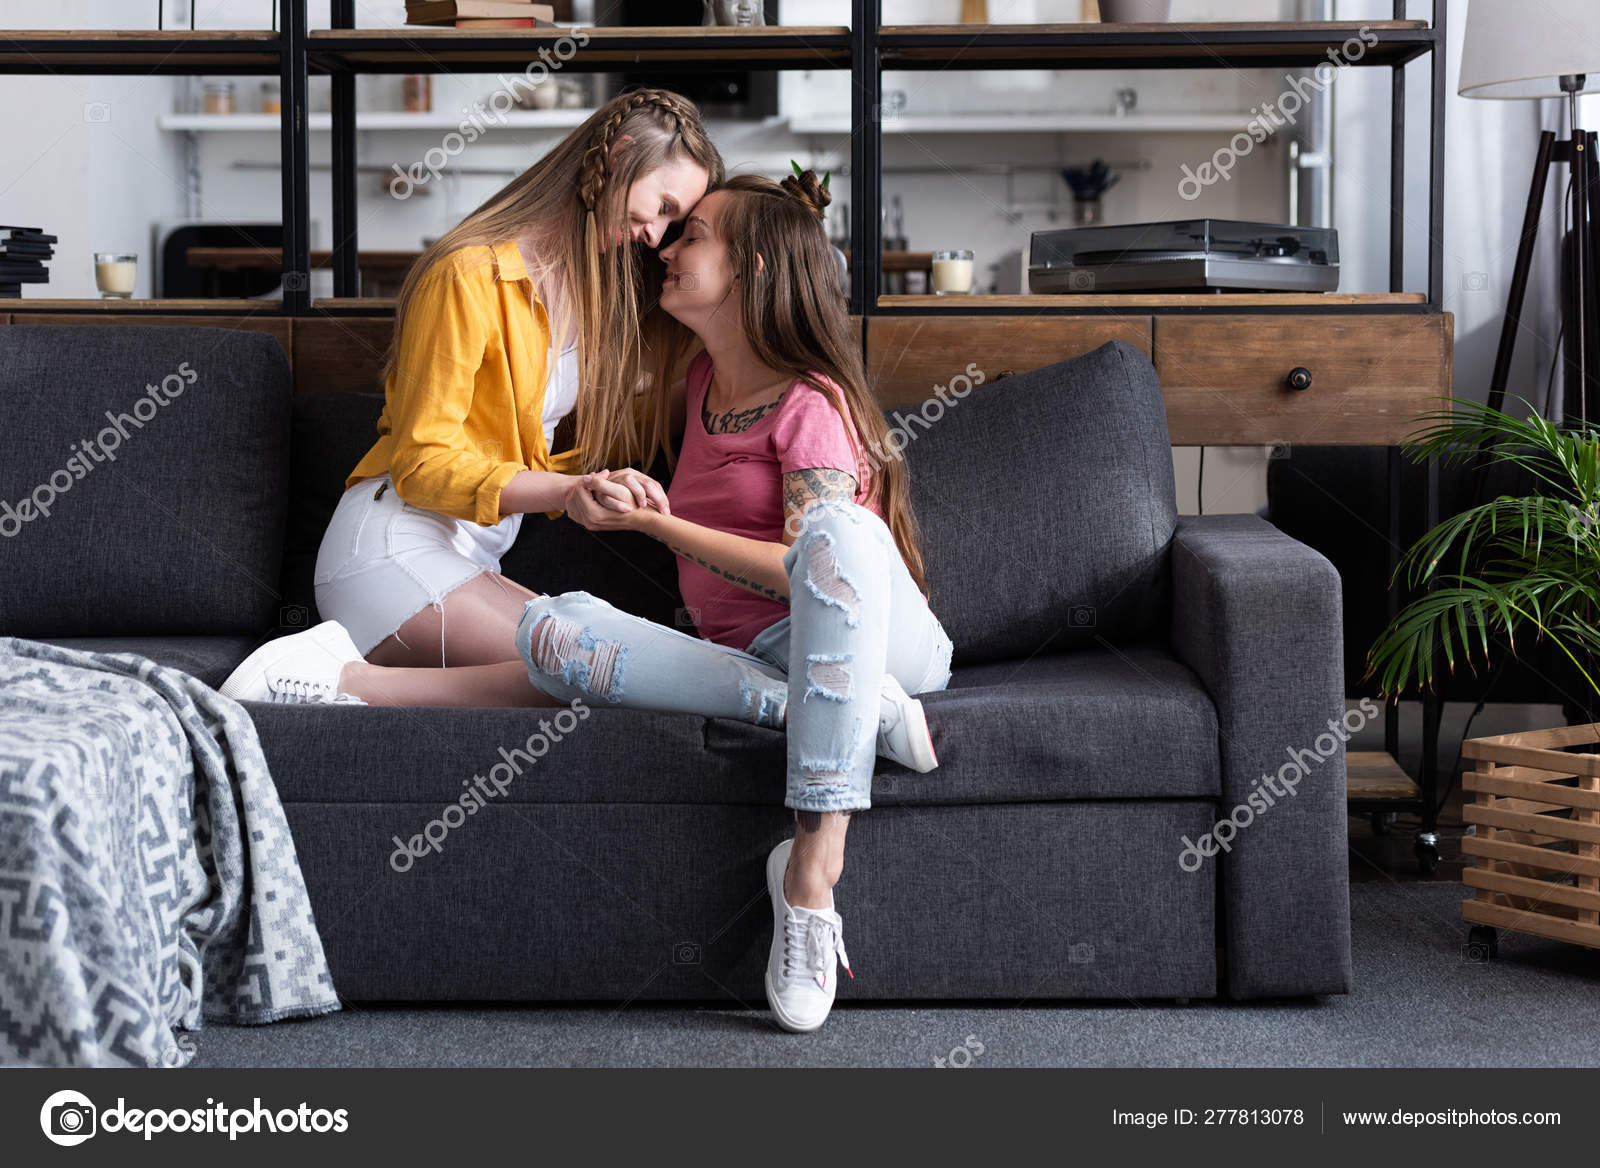 Lesbians On A Couch